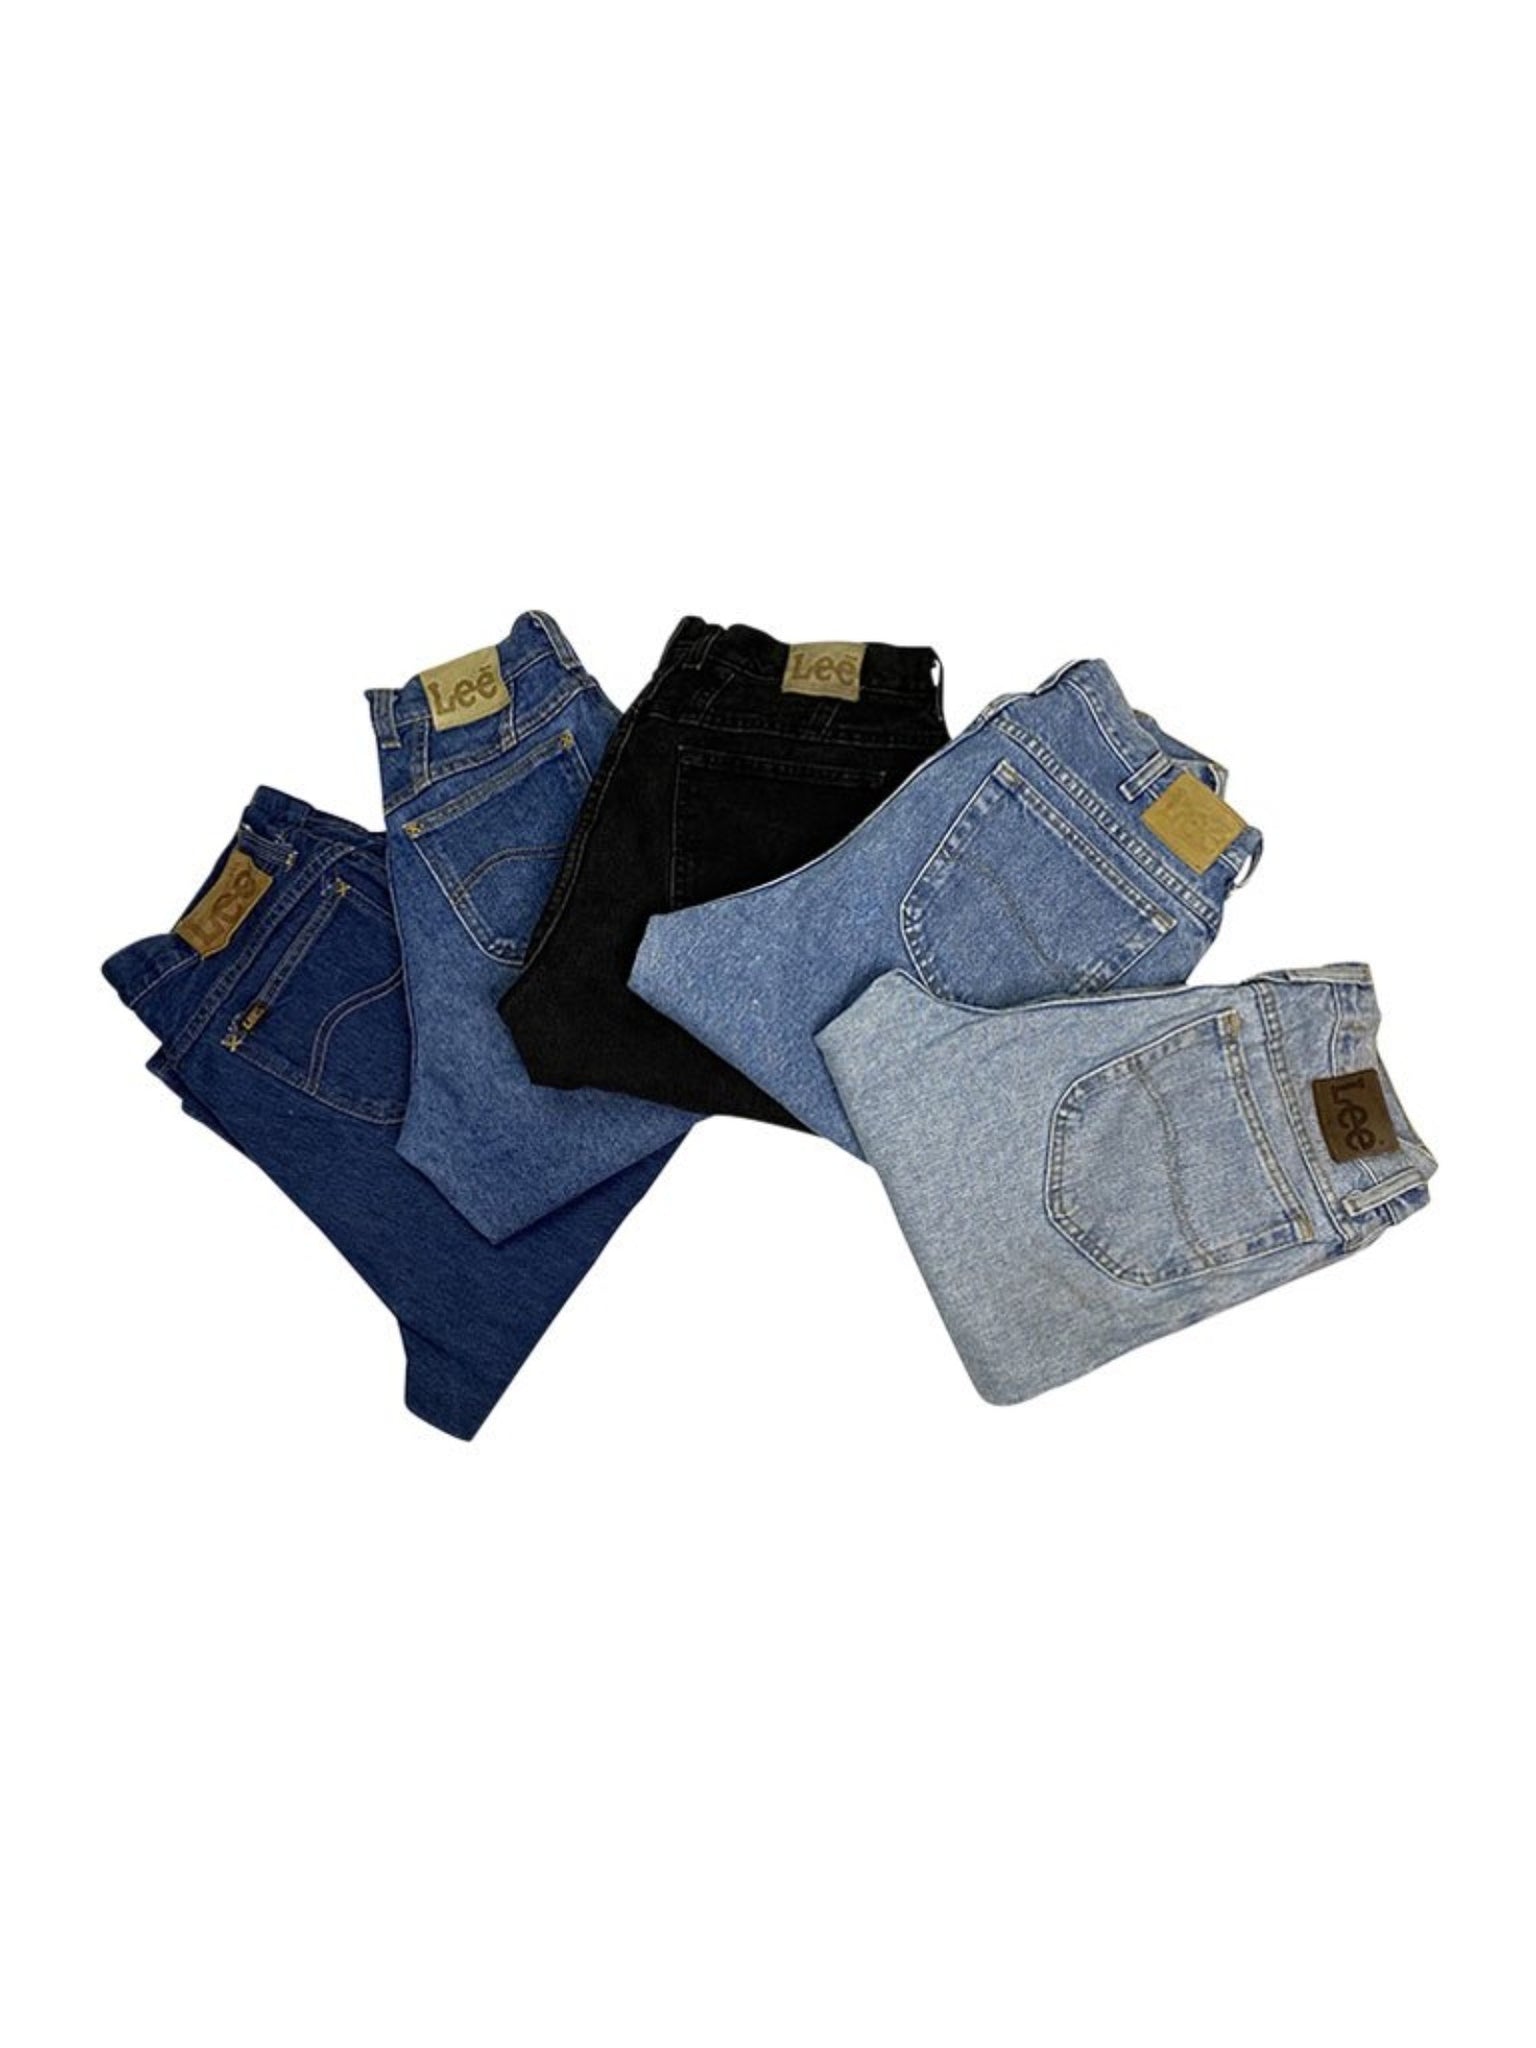 Vintage Lee High Waisted Jeans Bundle – American Recycled Clothing Wholesale